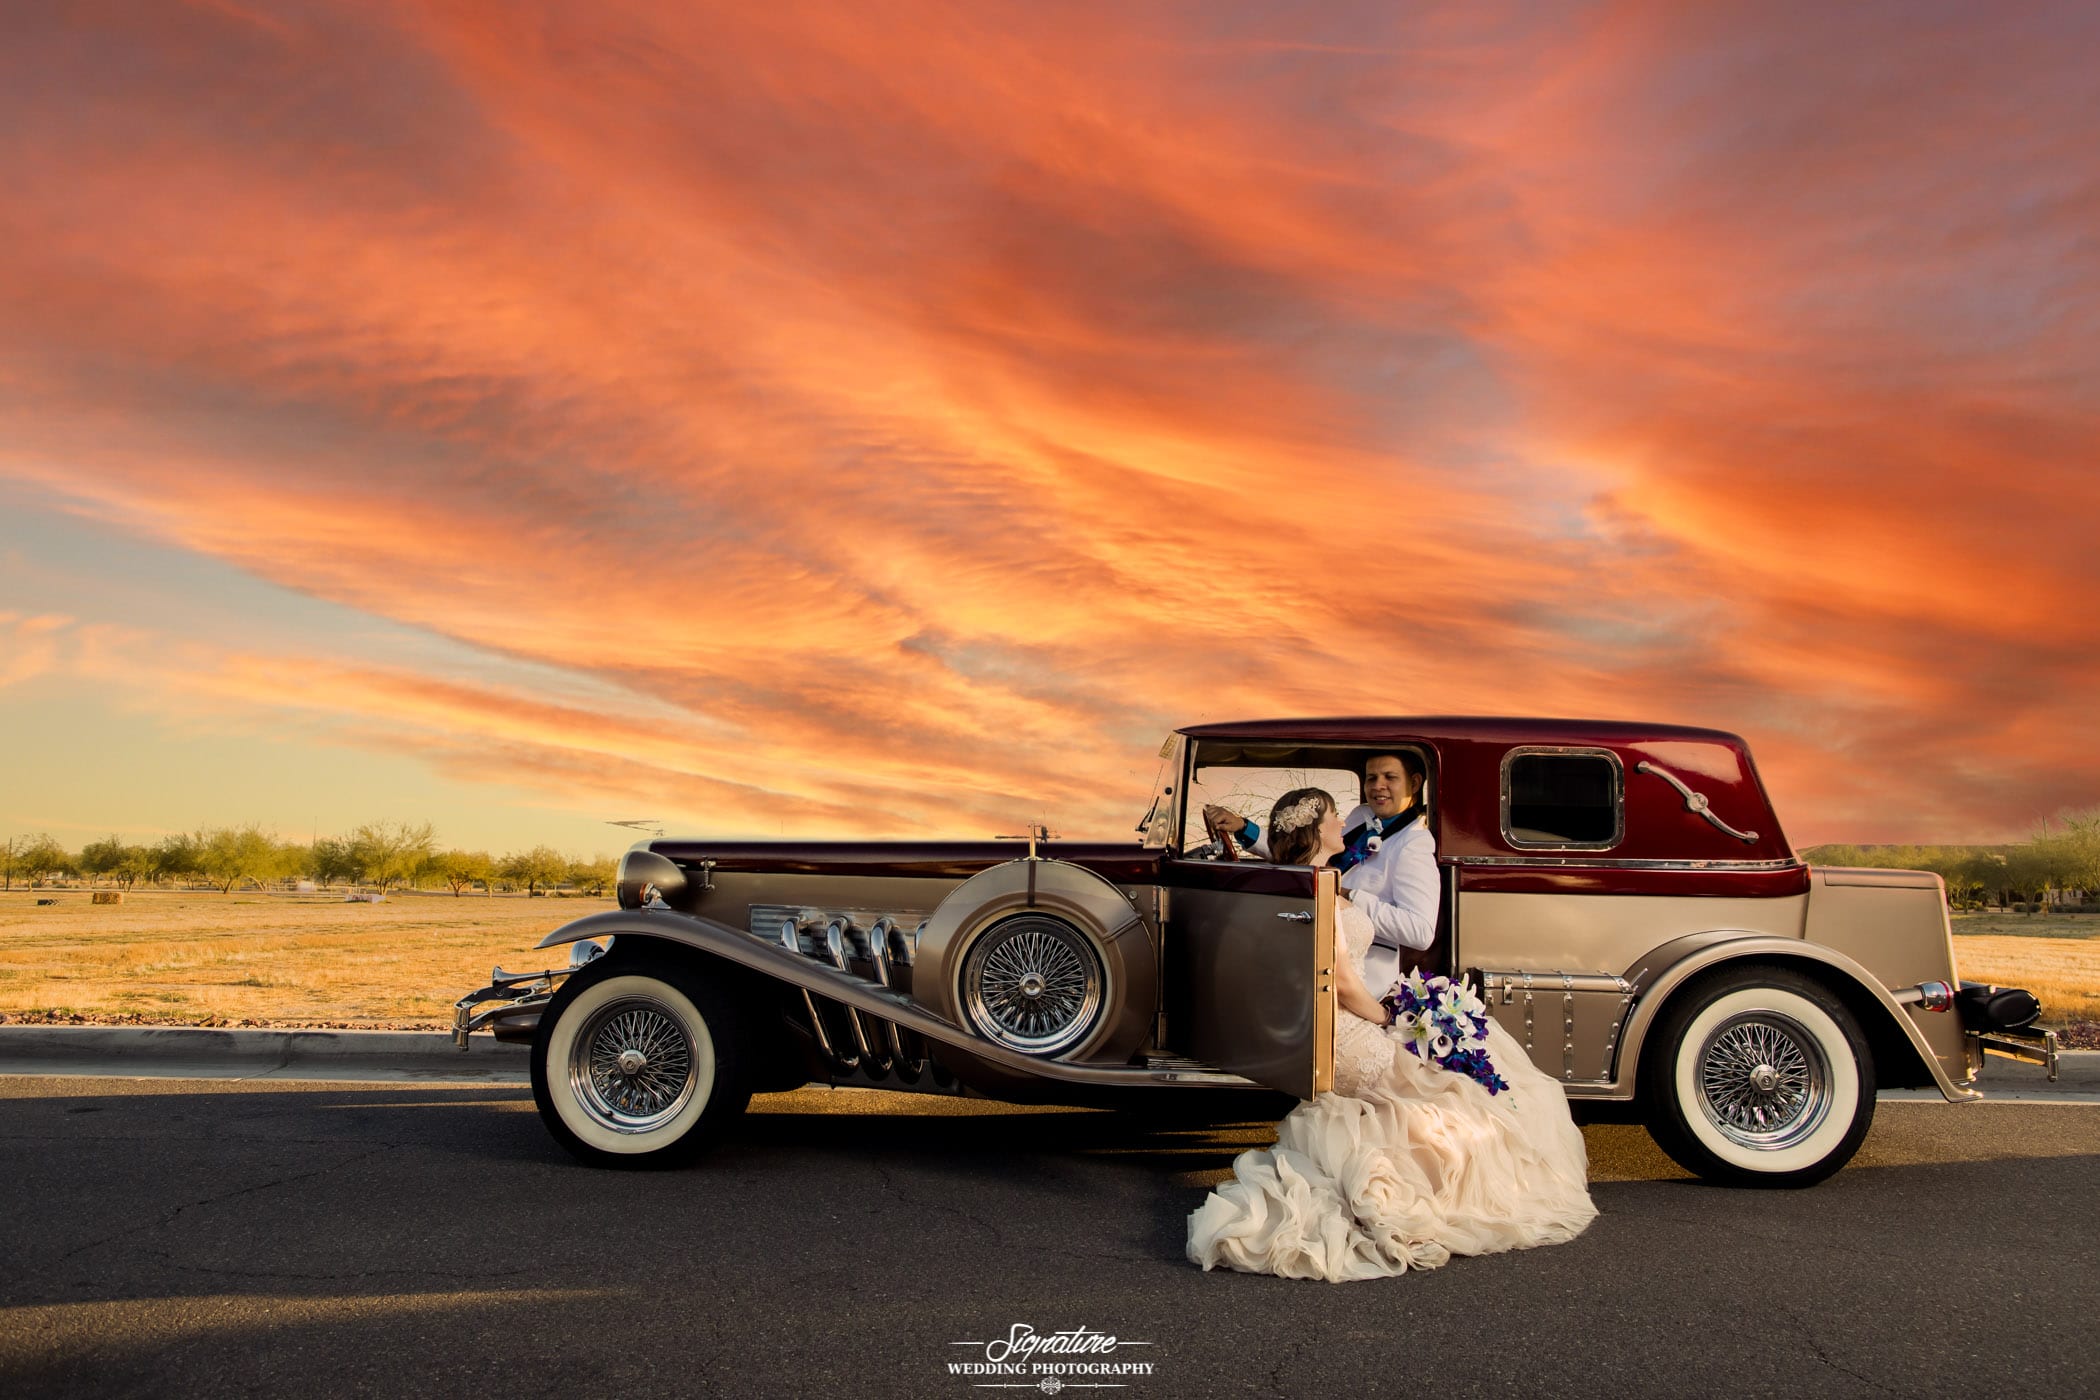 Bride and groom with vintage car at sunset